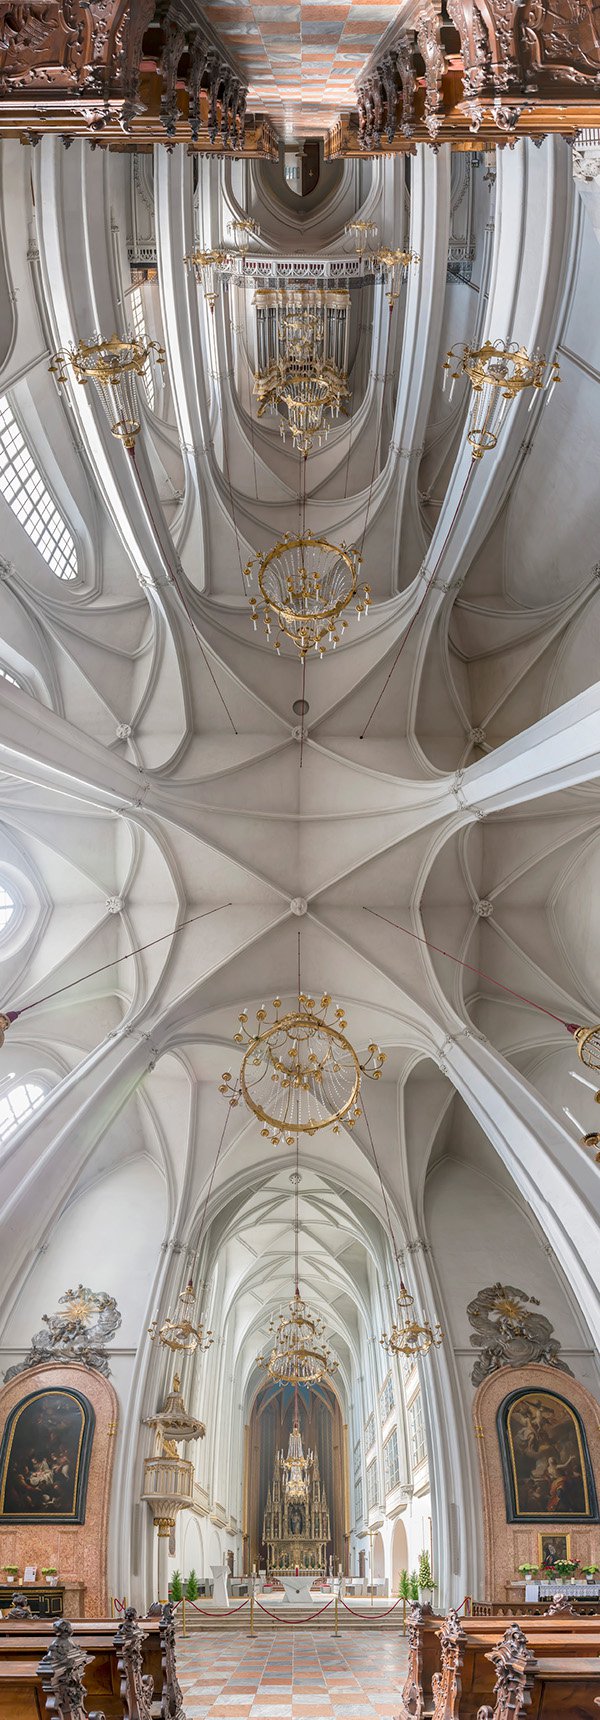 Vertical Churches An Ethereal Architecture Photography Series By Richard Silver 4